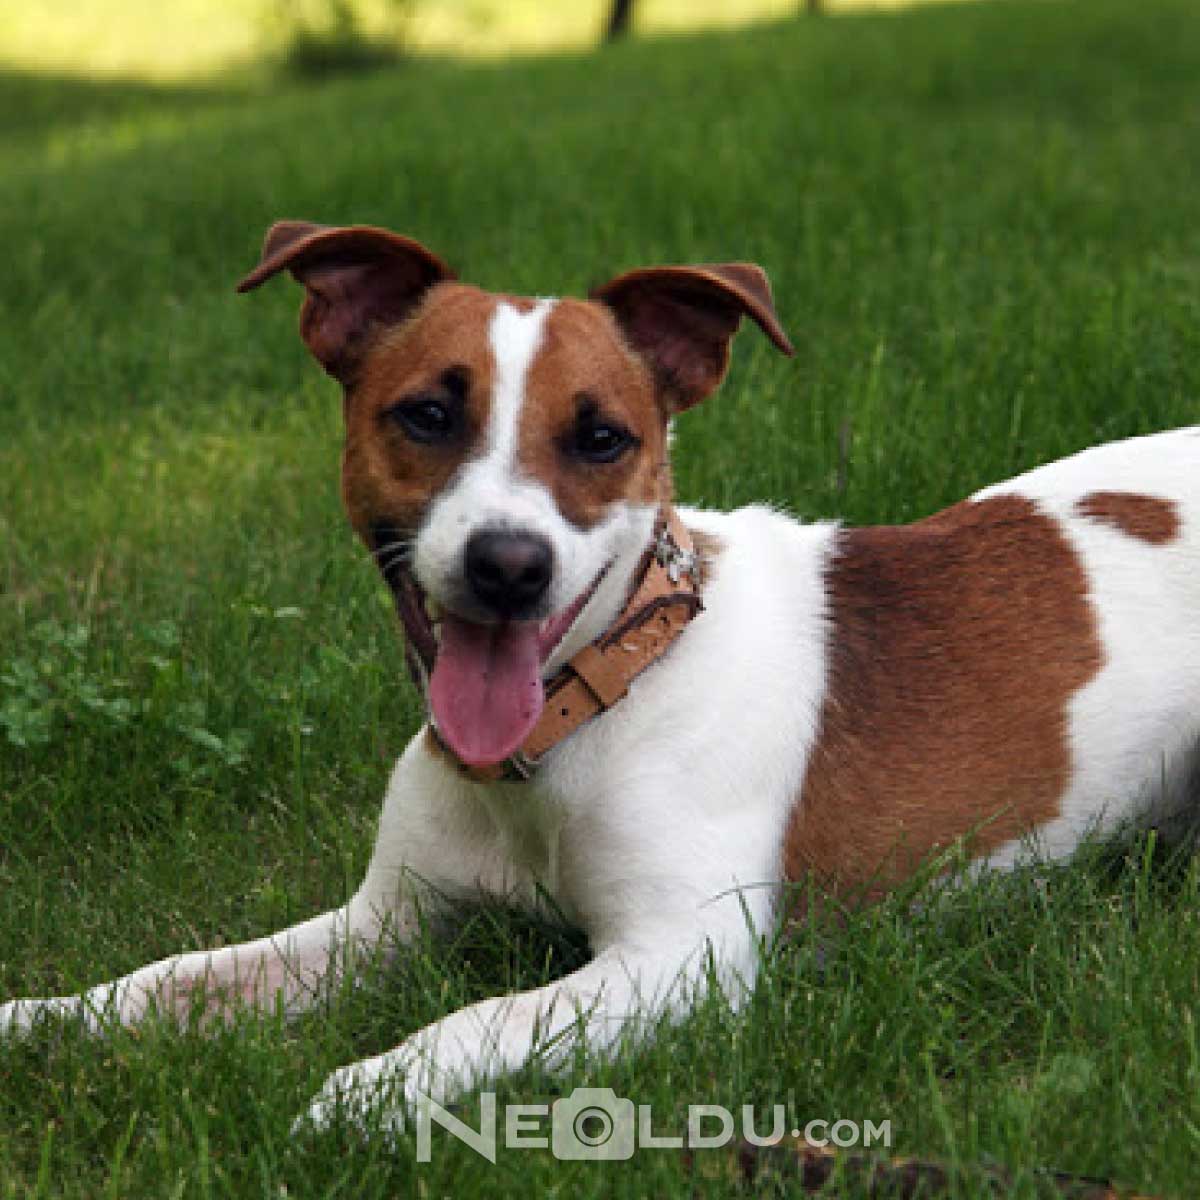 Information about the Jack Russell dog